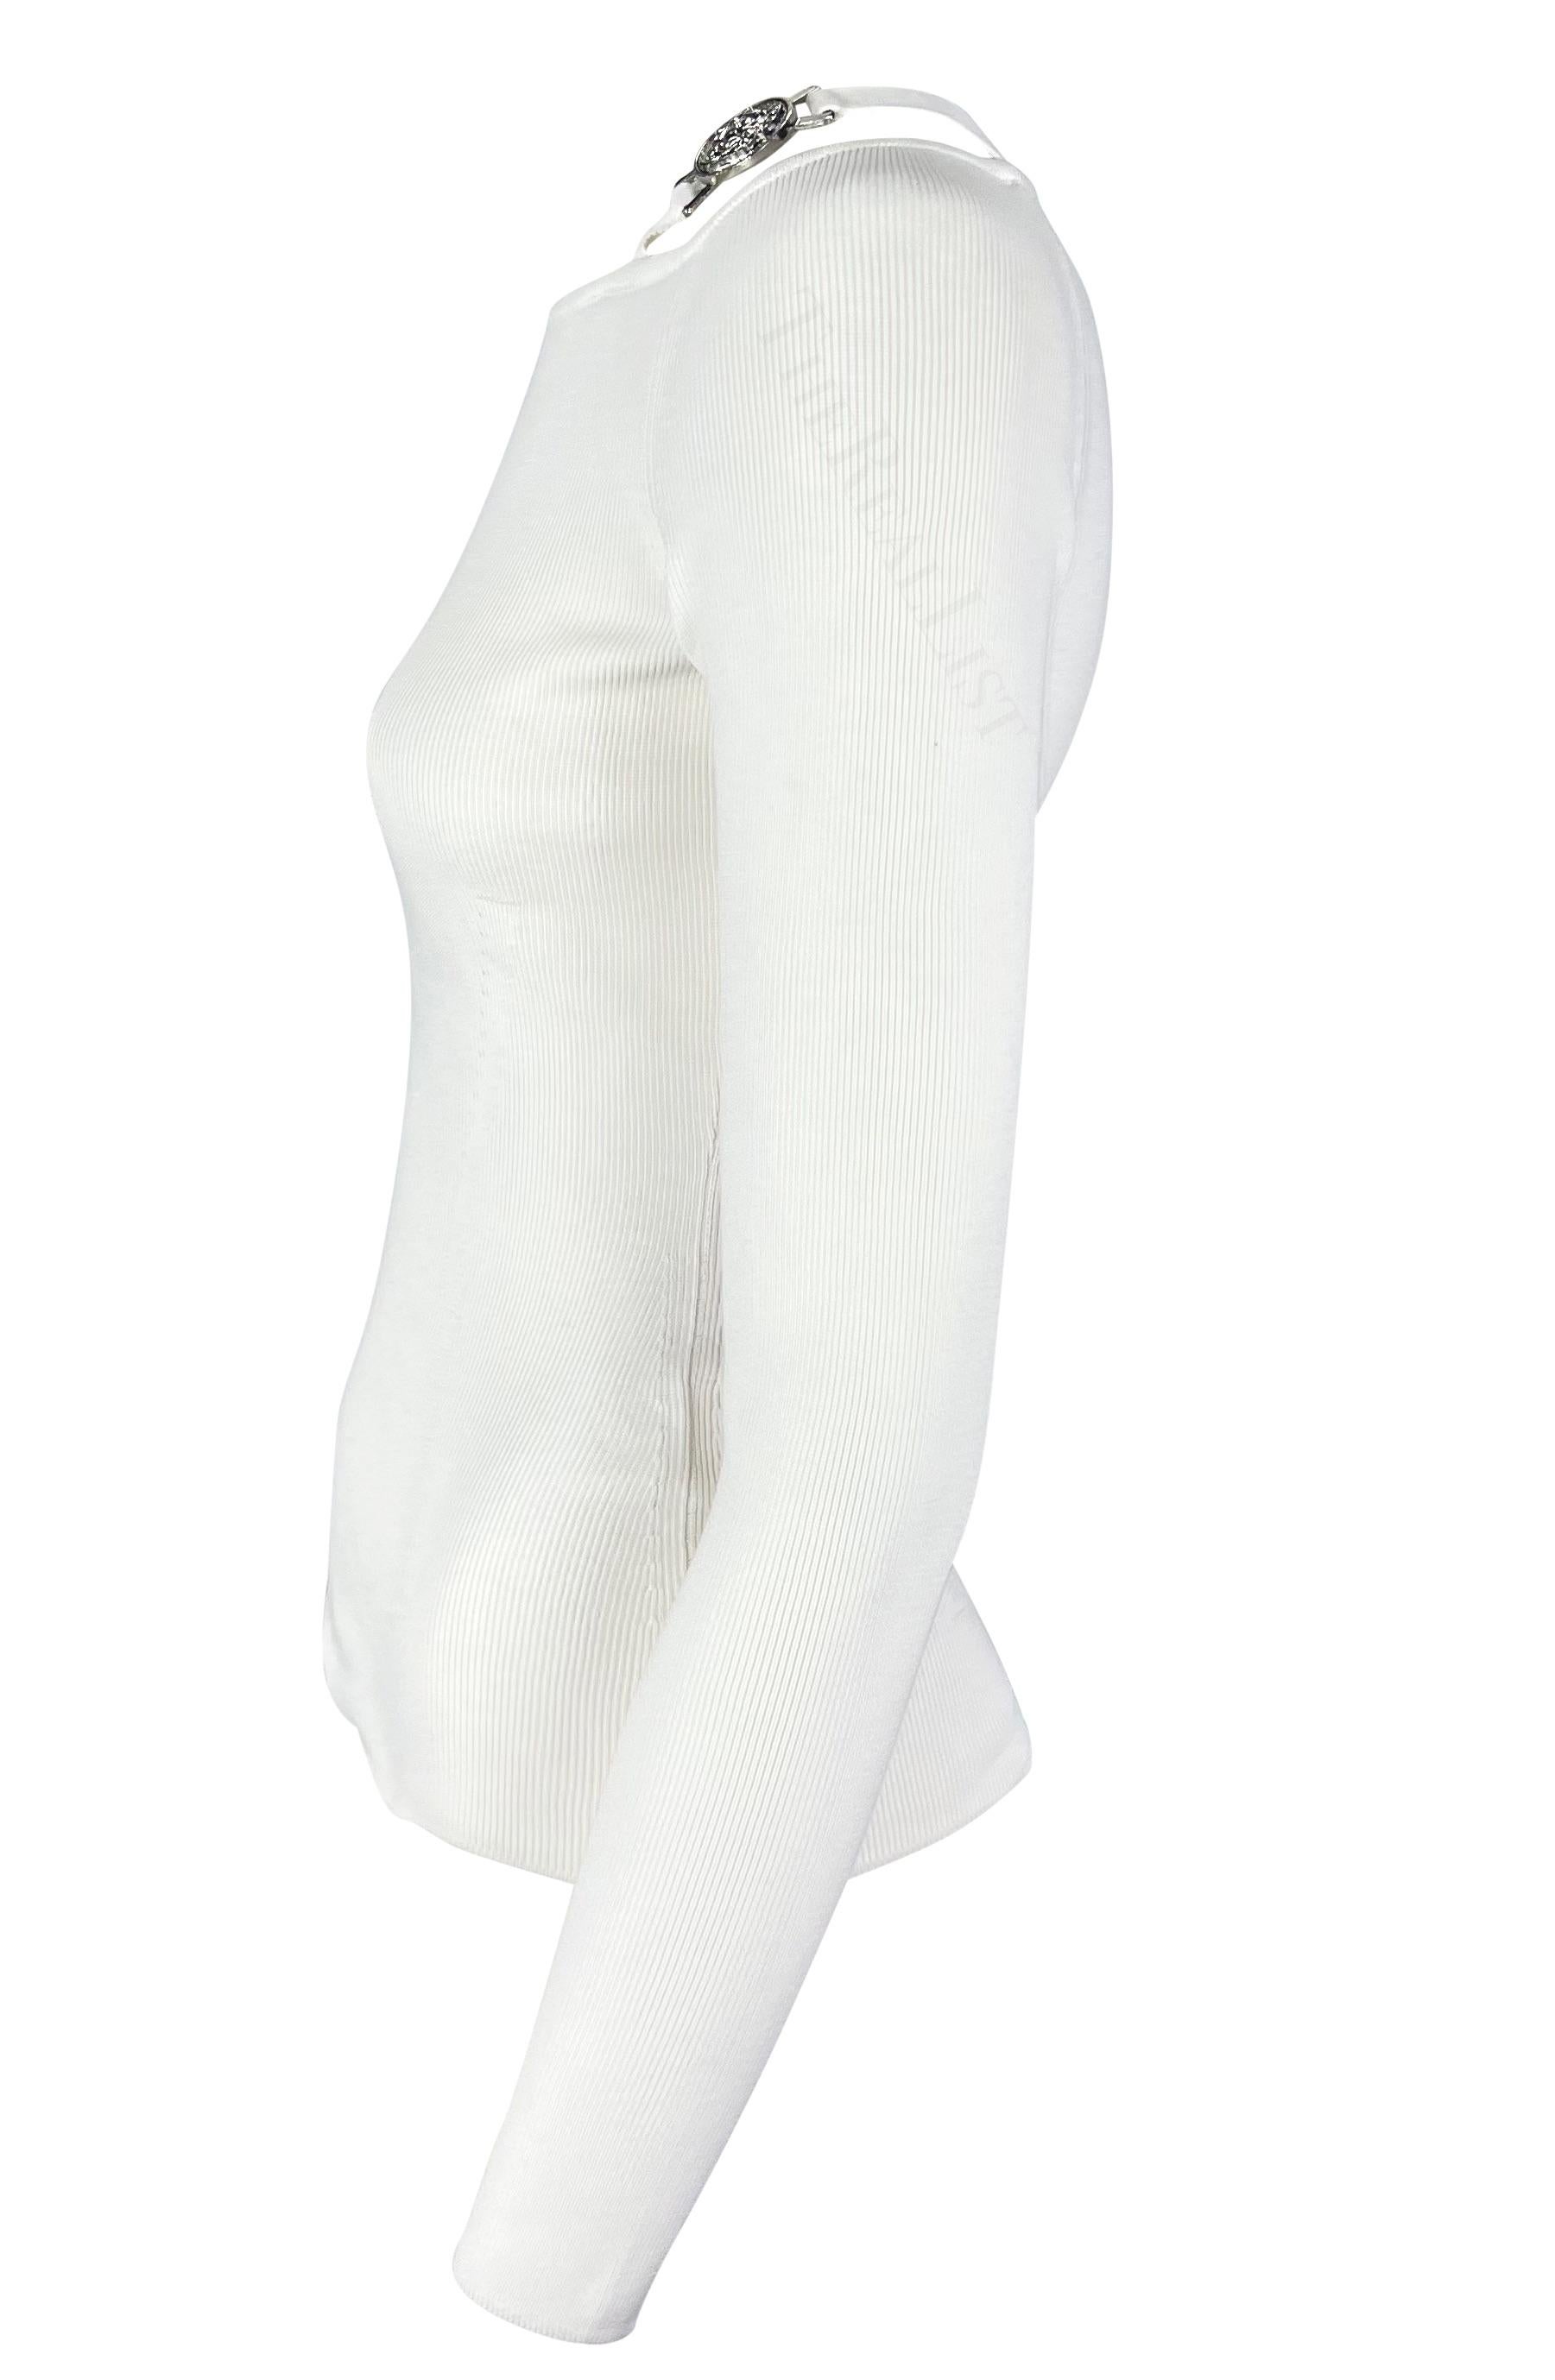 Women's S/S 2005 Versace by Donatella Medusa Medallion Buckle White Knit Stretch Top For Sale